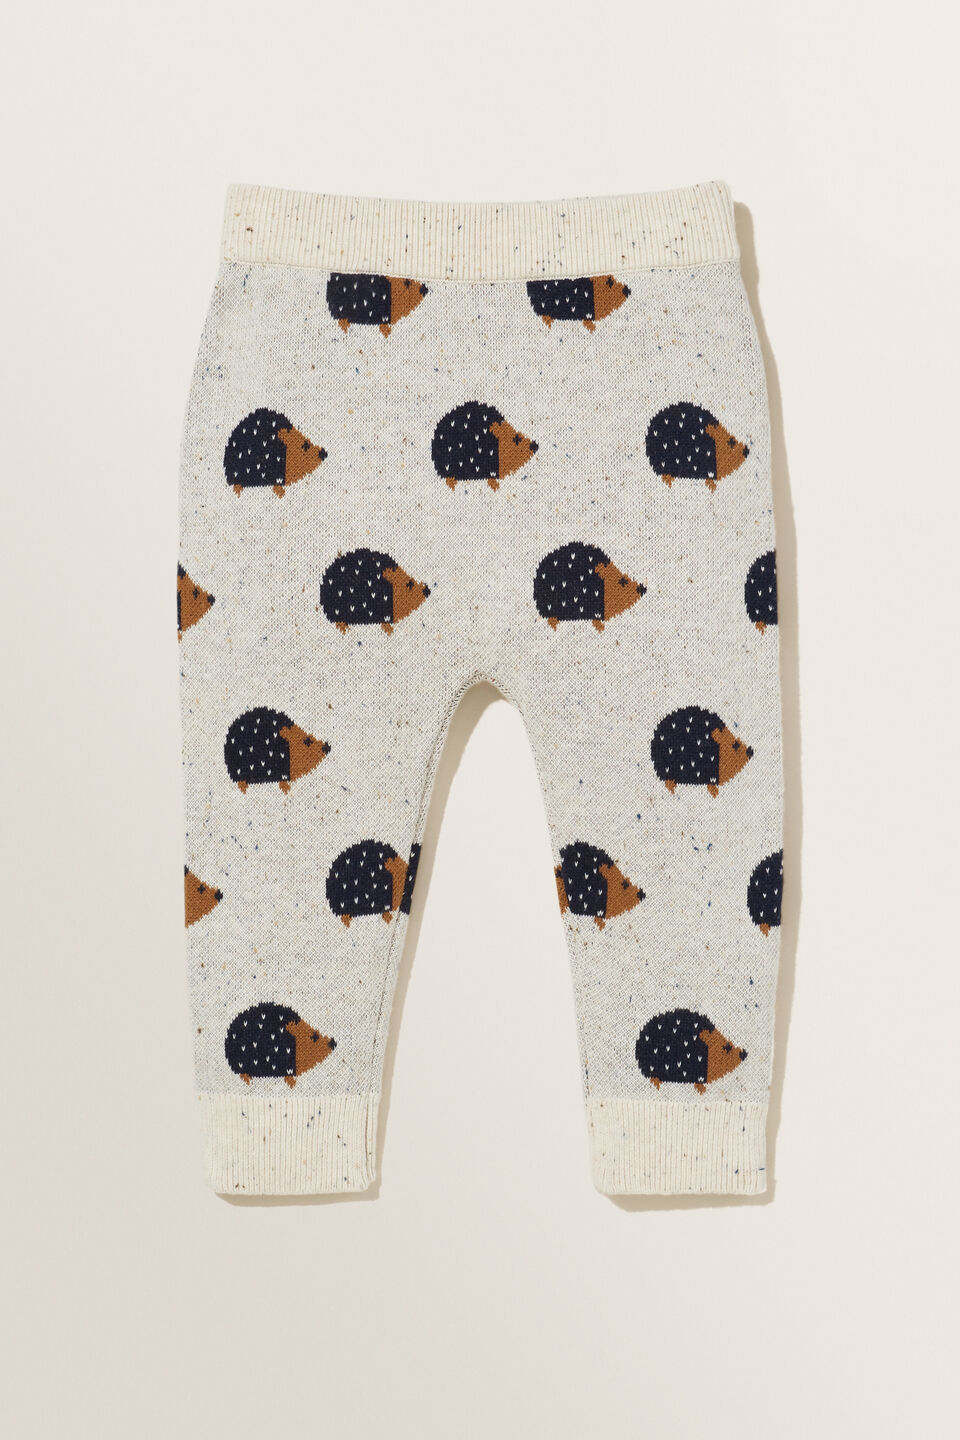 Echidna Knitted Pants  Cream Speckle